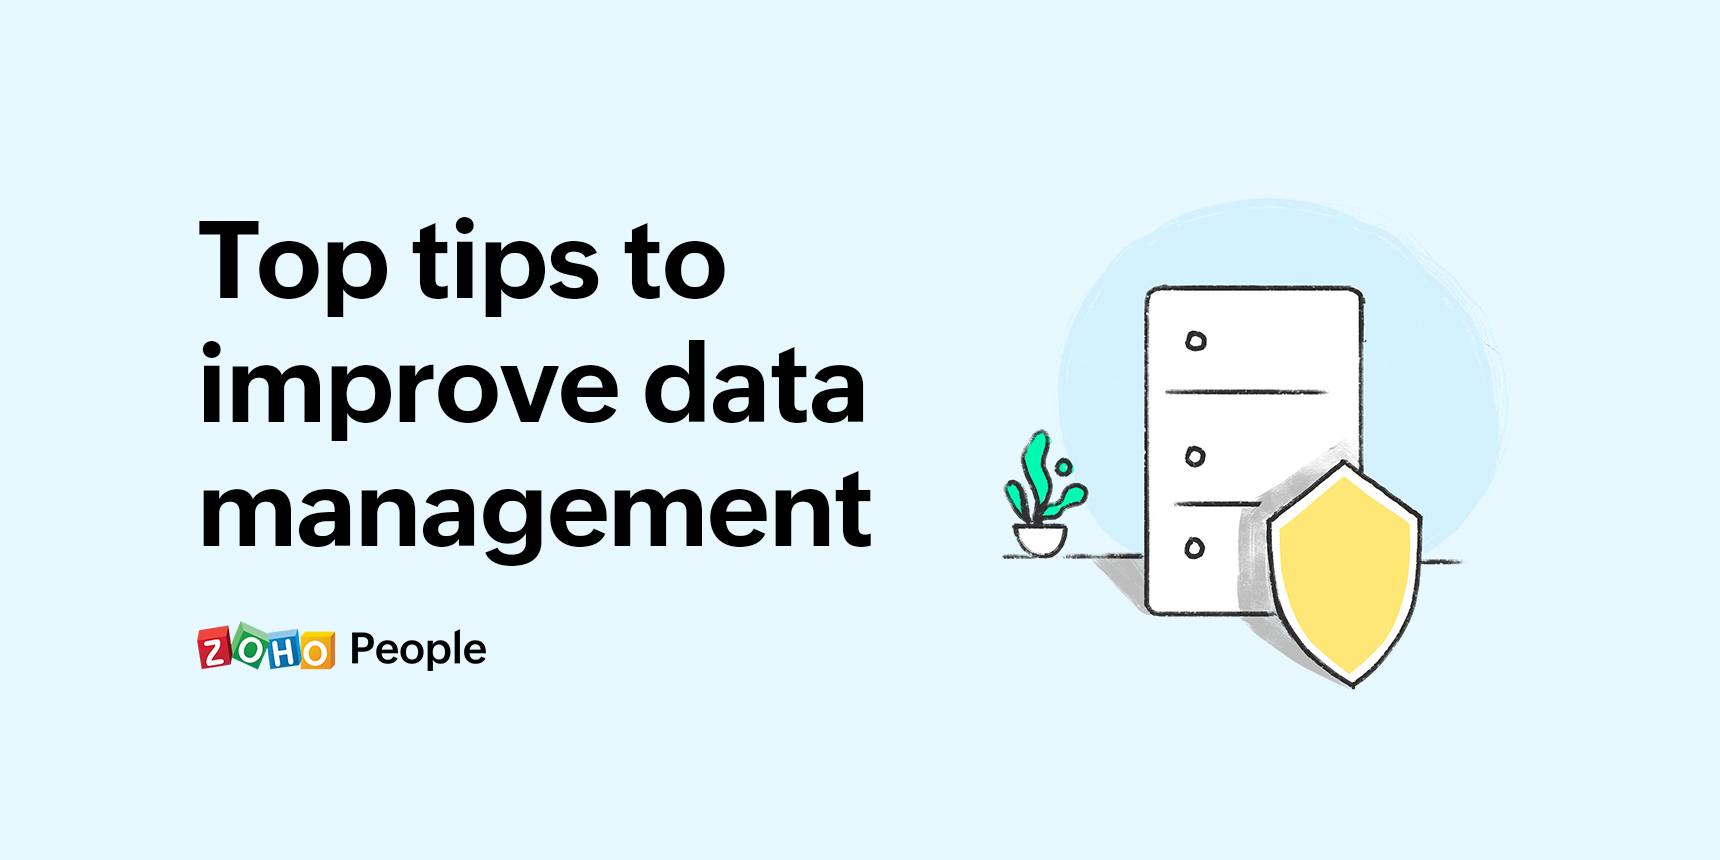 Top tips to improve data management - Data privacy